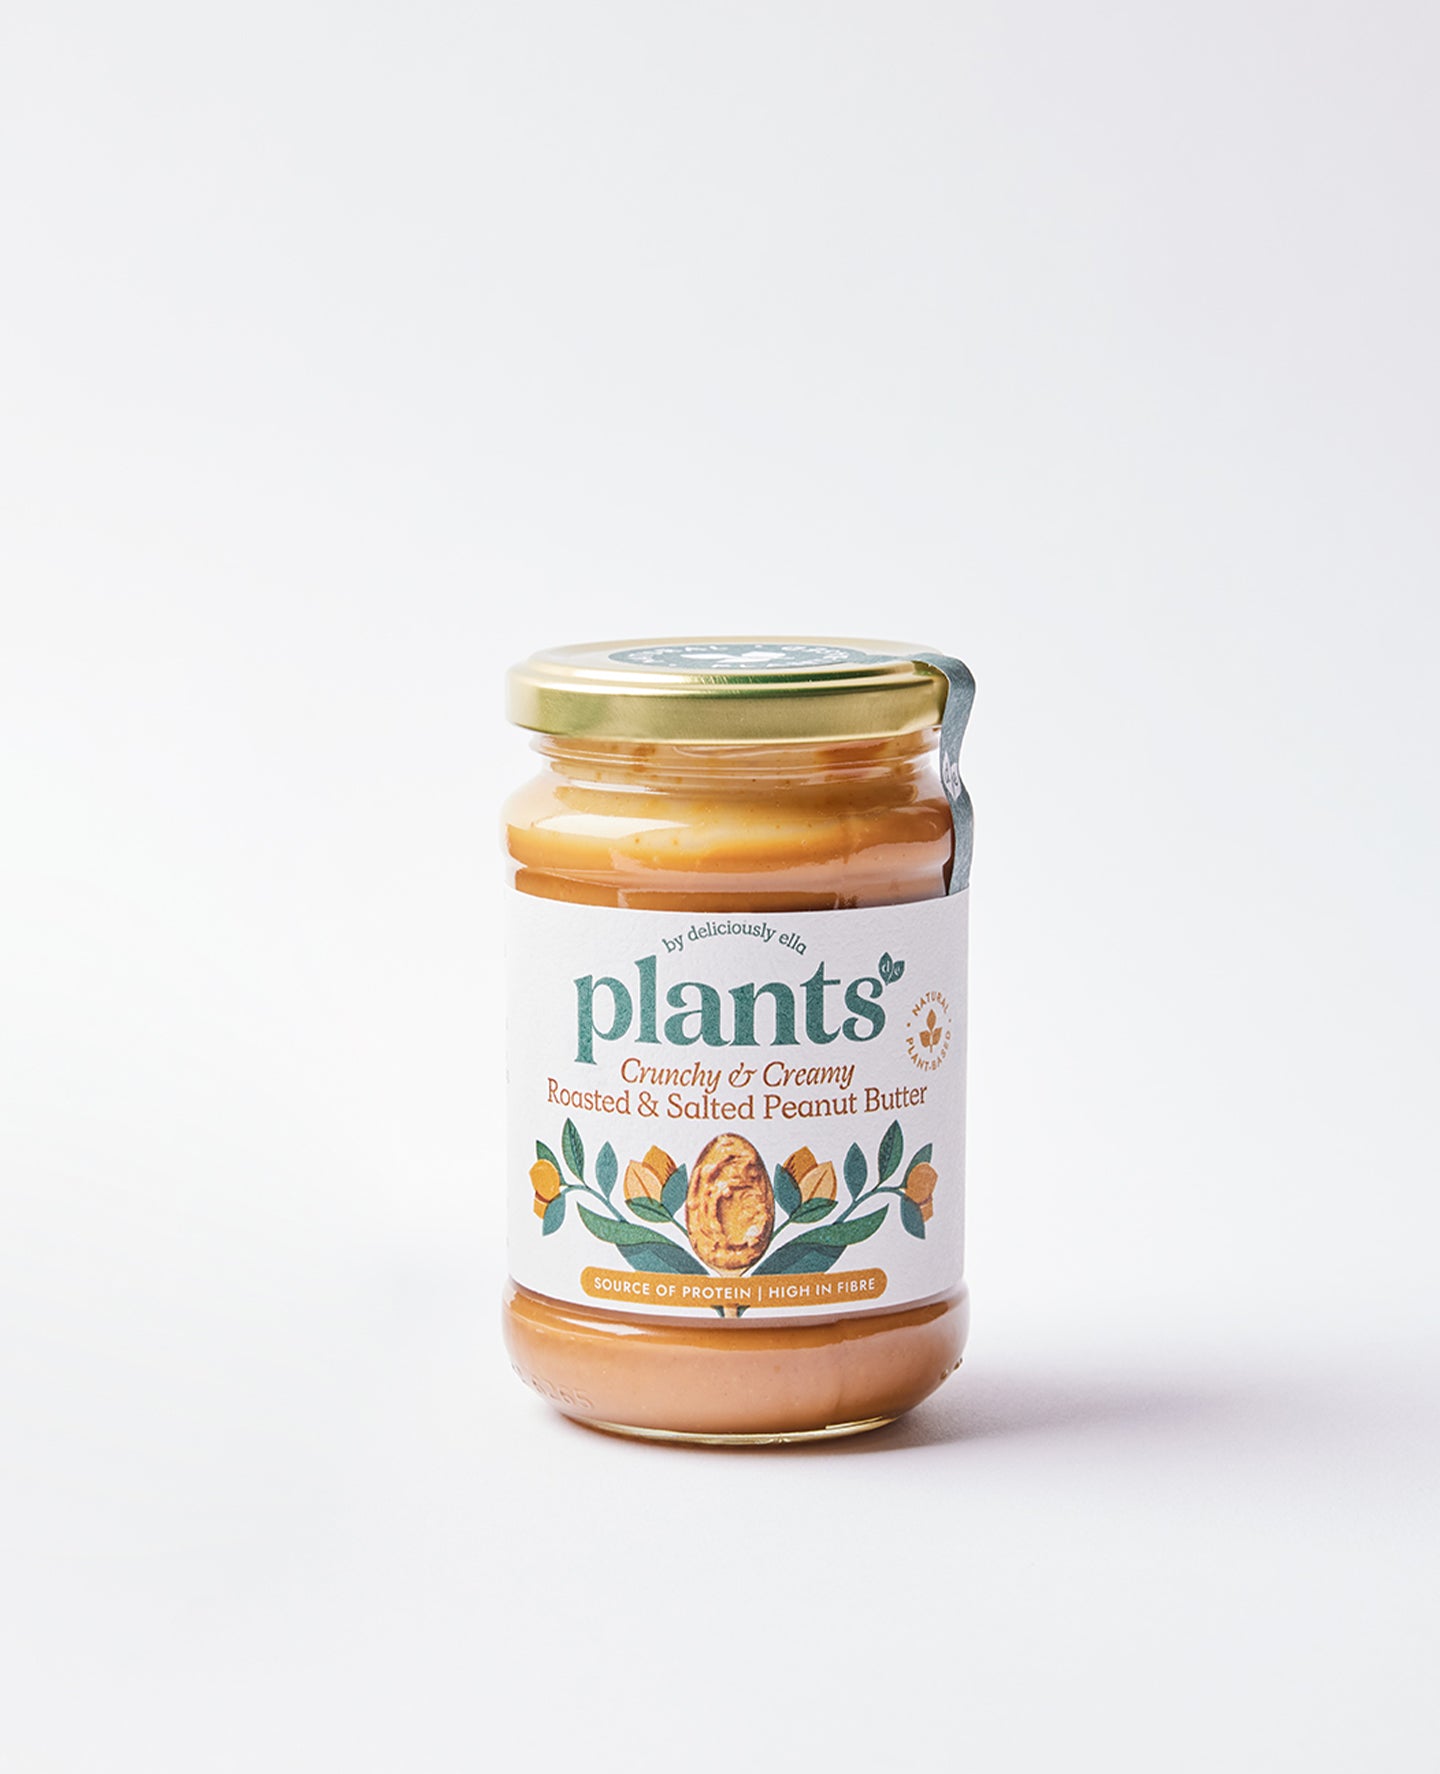 Creamy & Crunchy, Roasted & Salted Peanut Butter